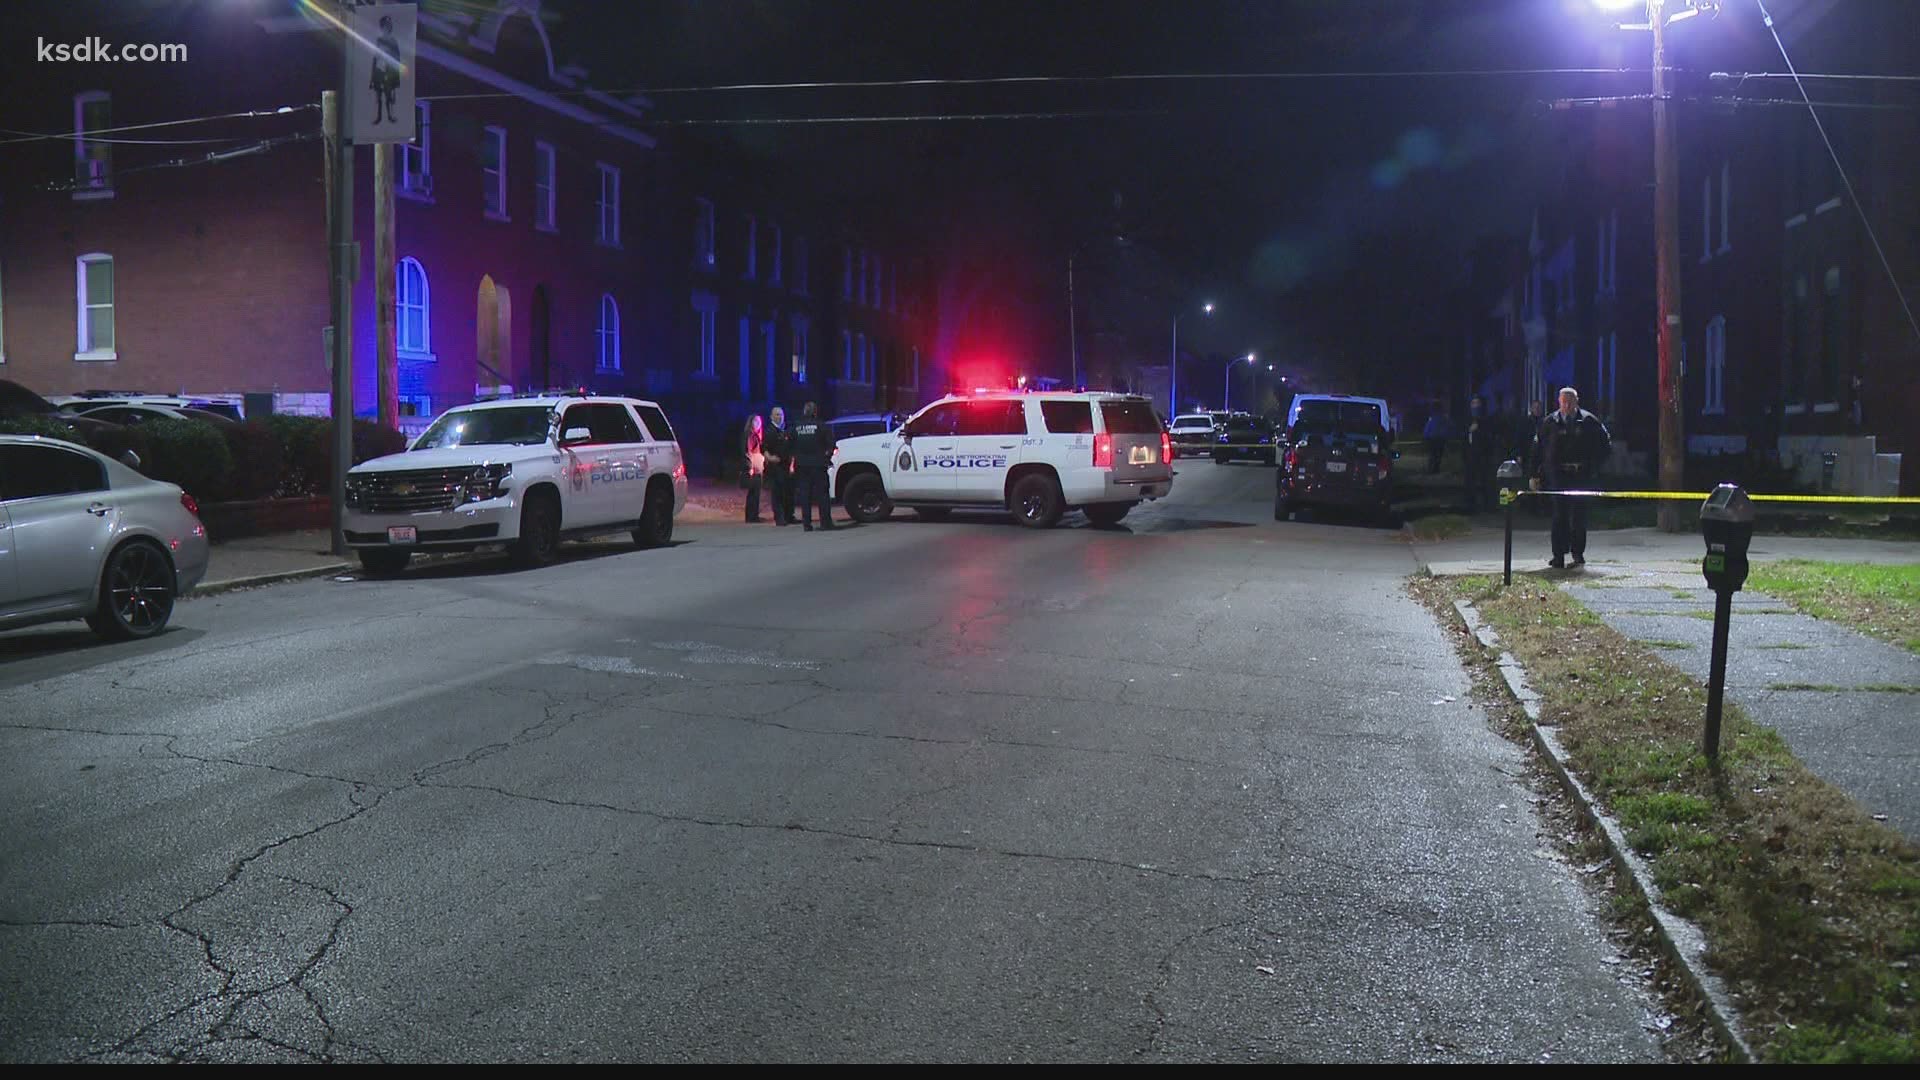 The teen was found shot on Cherokee Street just before 6:30 p.m.